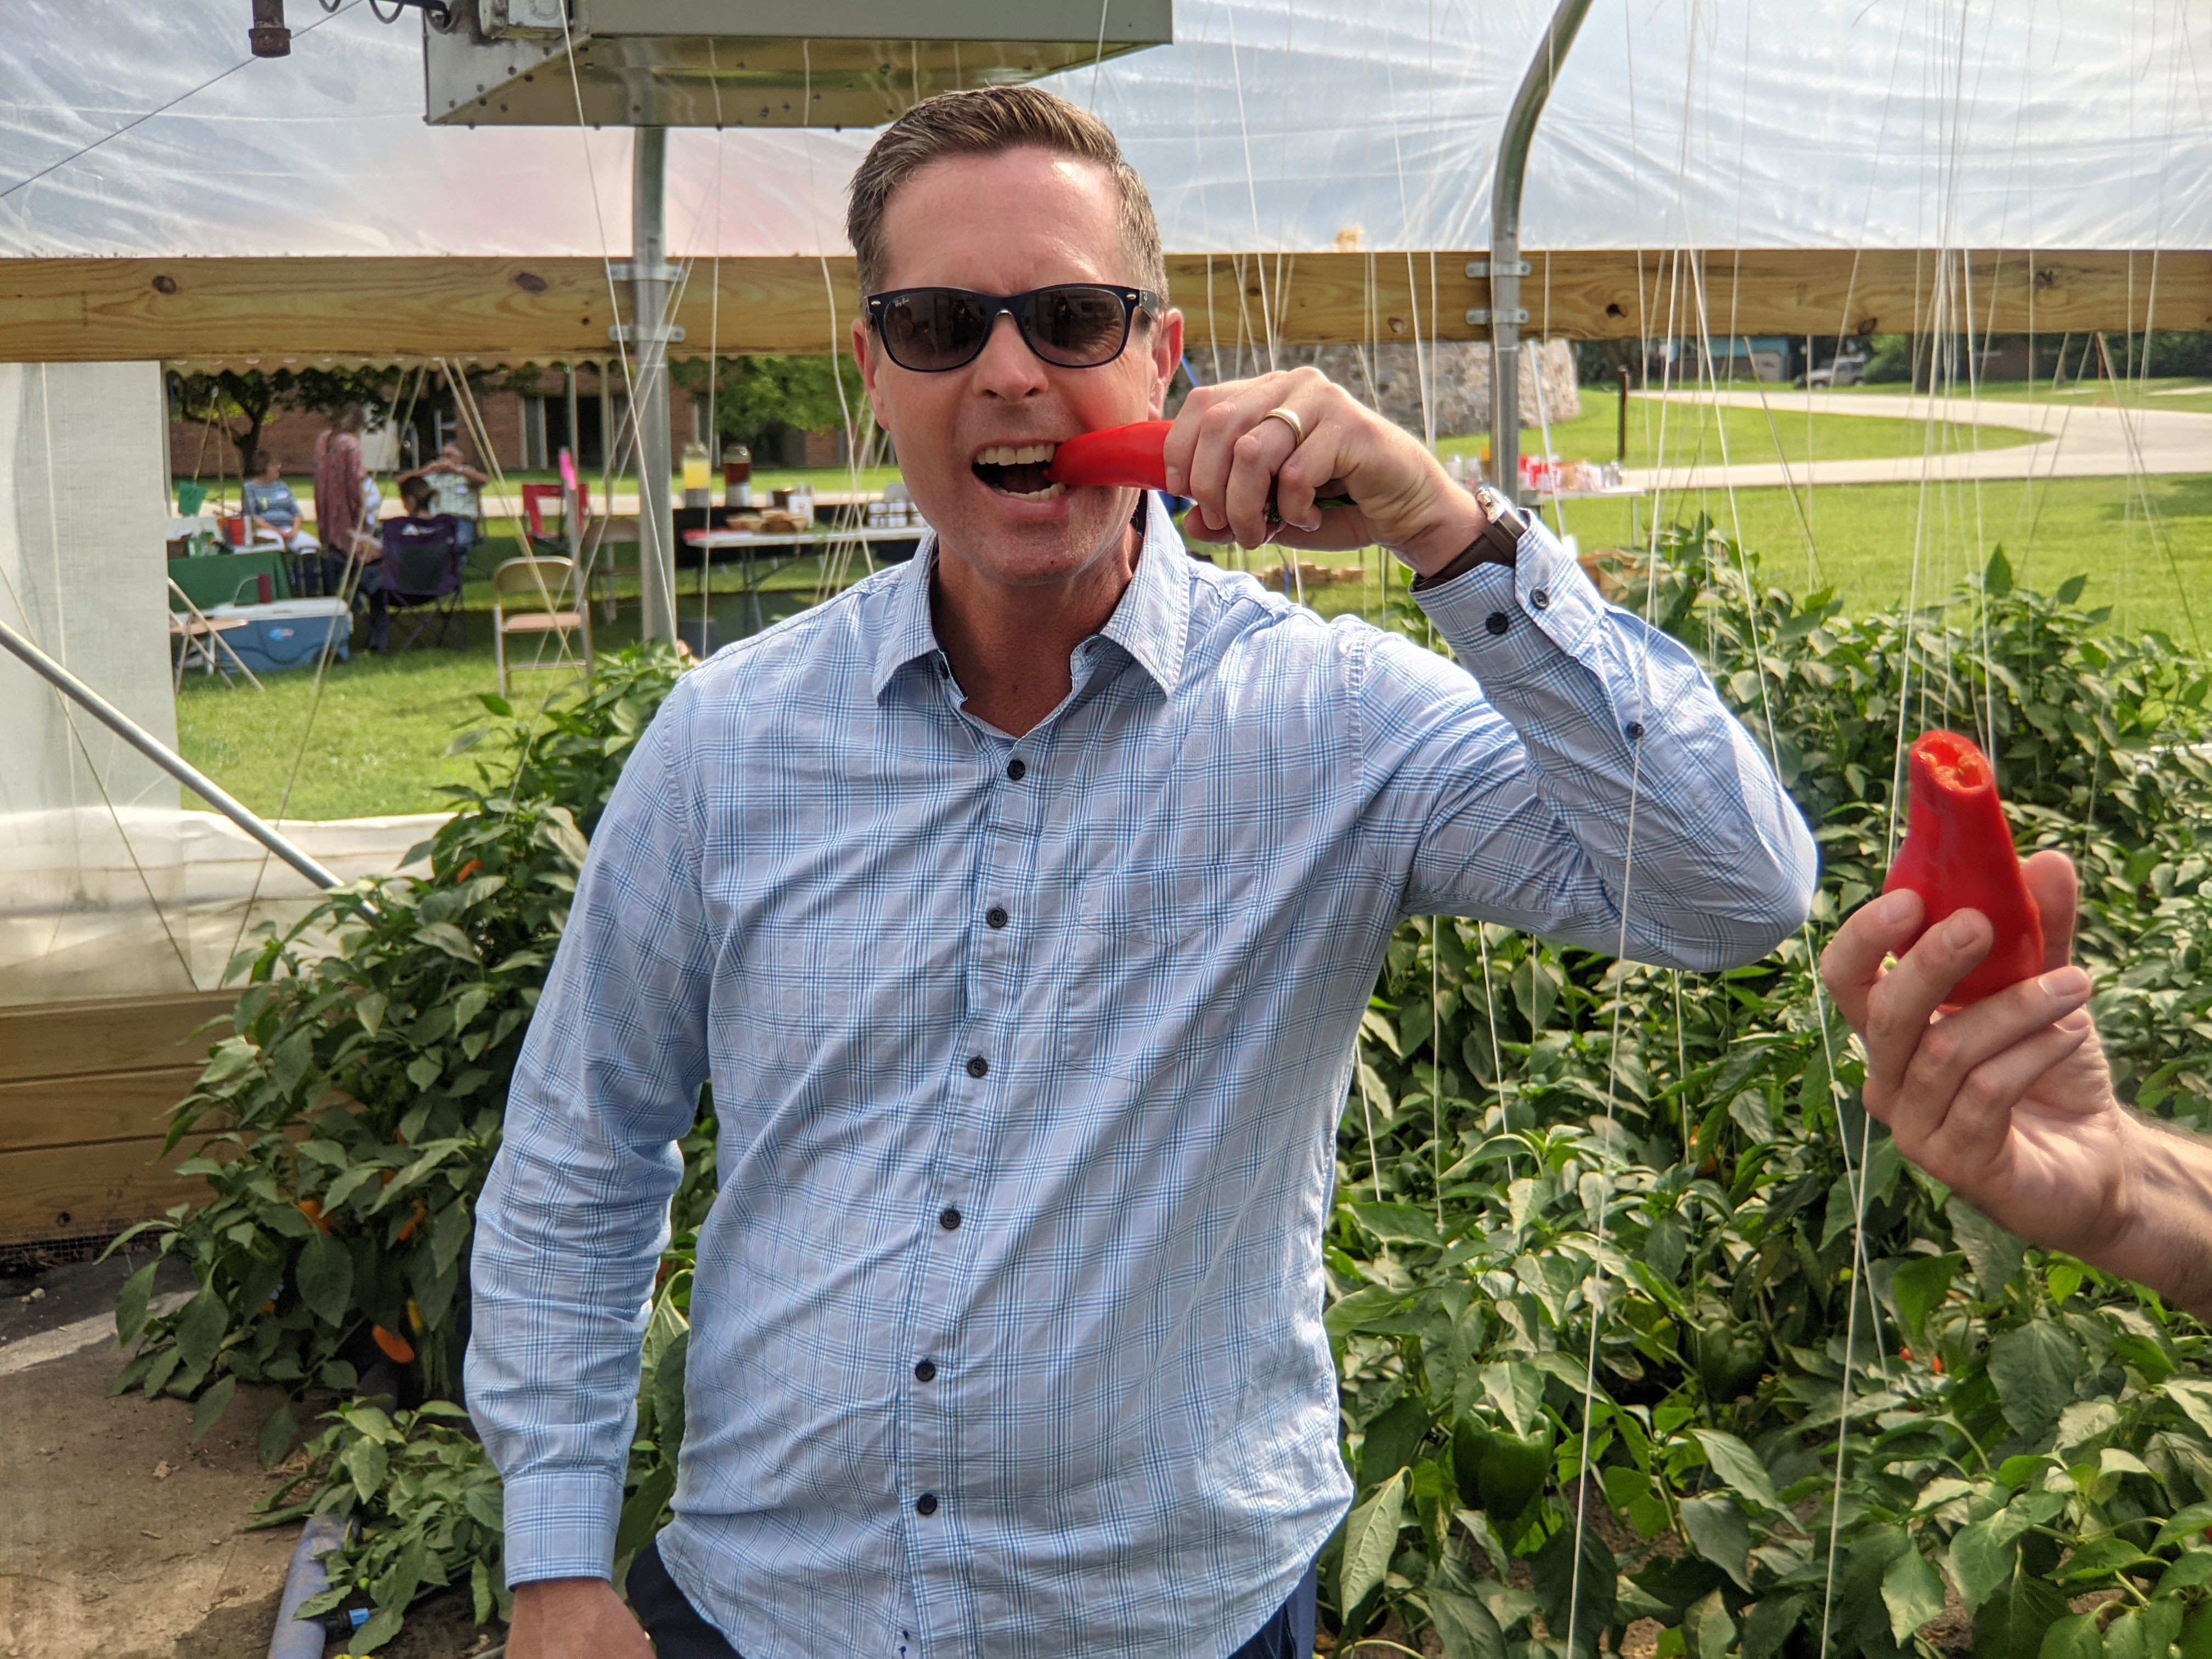 Congressman Rep. Rodney Davis take a big bit out of a red sweet pepper while inside the hoop house growing hundreds more! In sunglasses and smiling at the camera as he goes in for another bite!